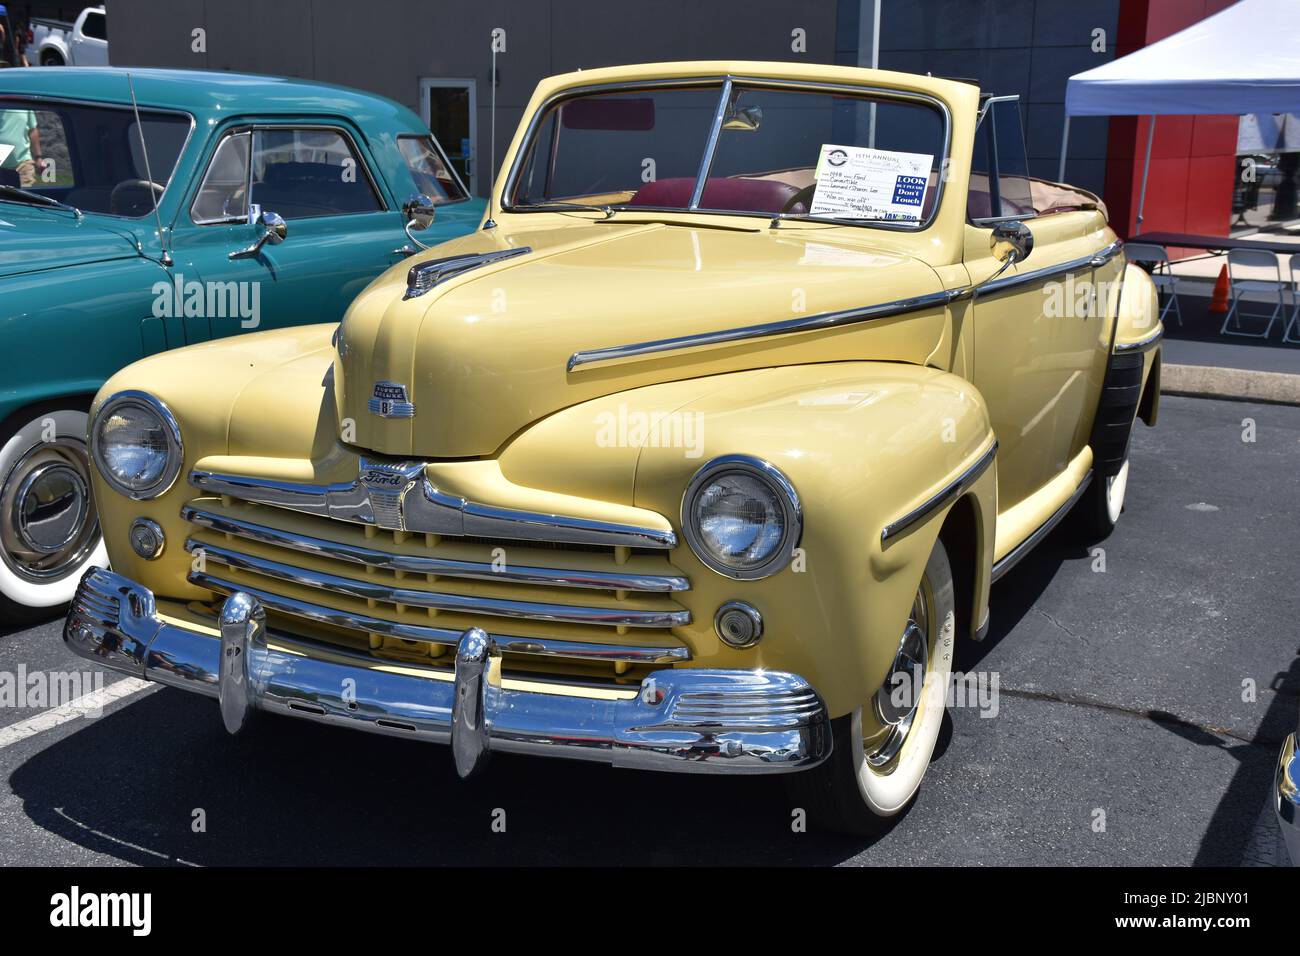 A 1948 Ford Convertible on display at a car show. Stock Photo